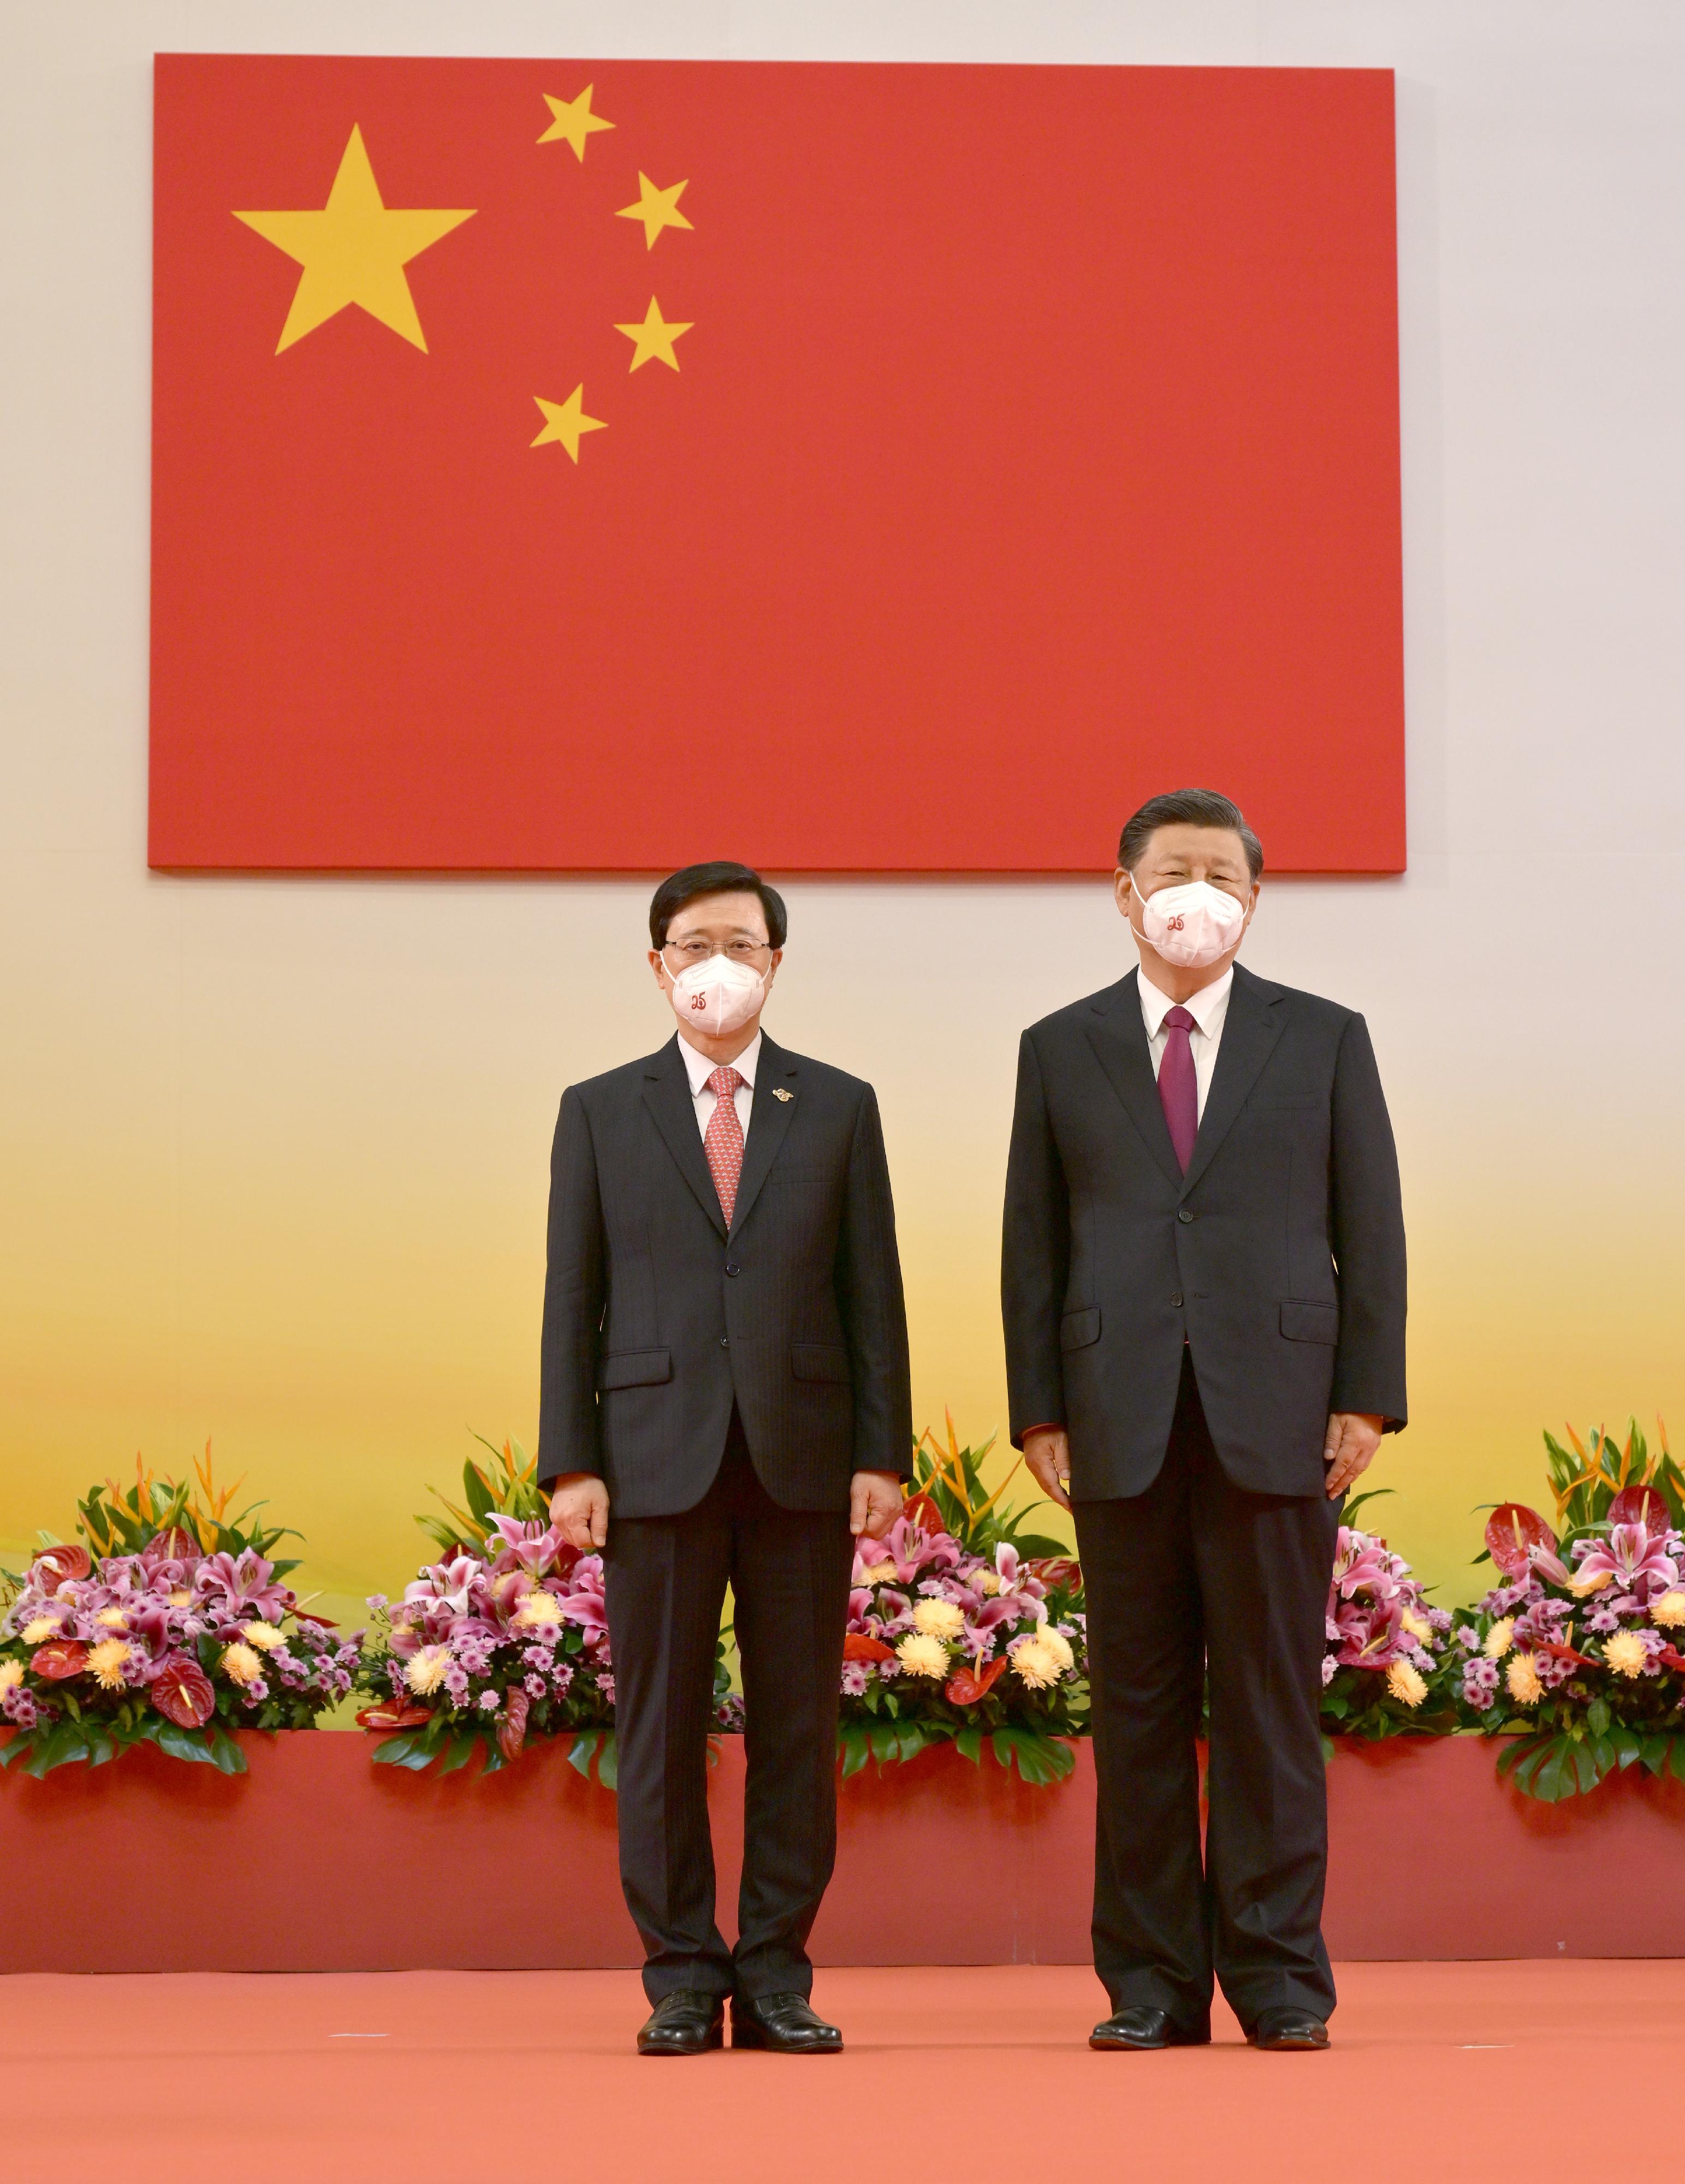 President Xi Jinping swore in the Chief Executive, Mr John Lee, at the Inaugural Ceremony of the Sixth-term Government of the Hong Kong Special Administrative Region at the Hong Kong Convention and Exhibition Centre this morning (July 1). The President (right) and Mr Lee (left) are pictured after the swearing-in.